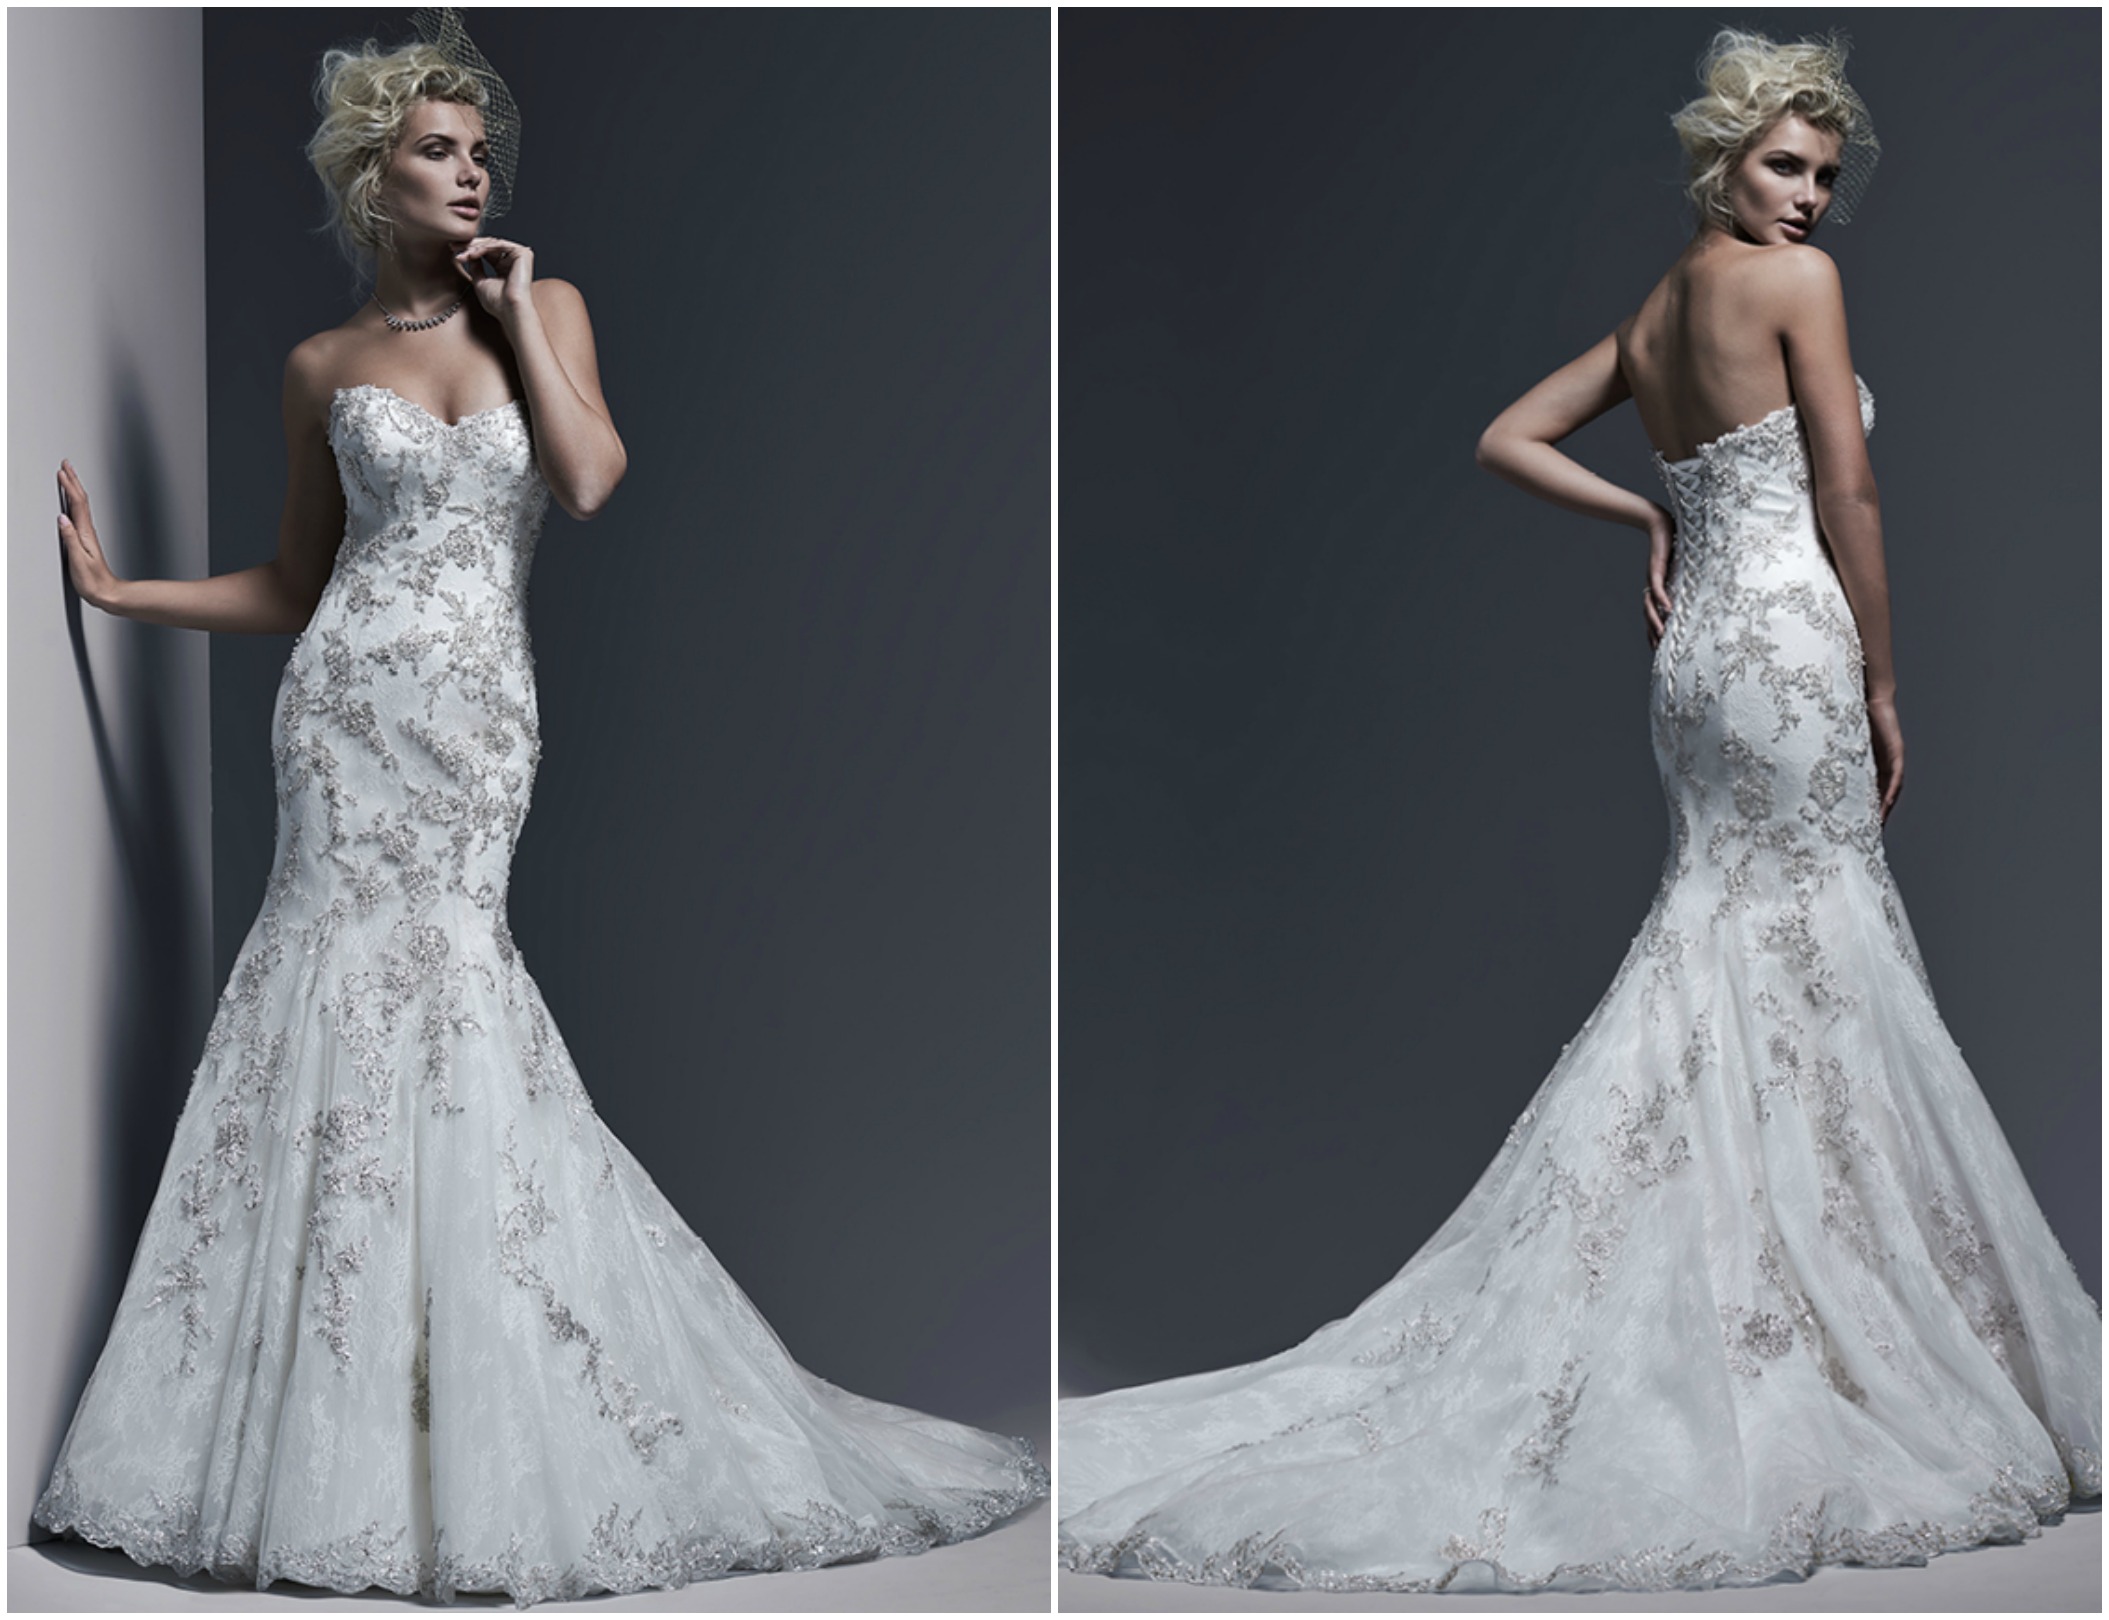 <a href="http://www.sotteroandmidgley.com/dress.aspx?style=5SW615LU&amp;page=0&amp;pageSize=36&amp;keywordText=&amp;keywordType=All" target="_blank">Sottero and Midgley 2016</a>